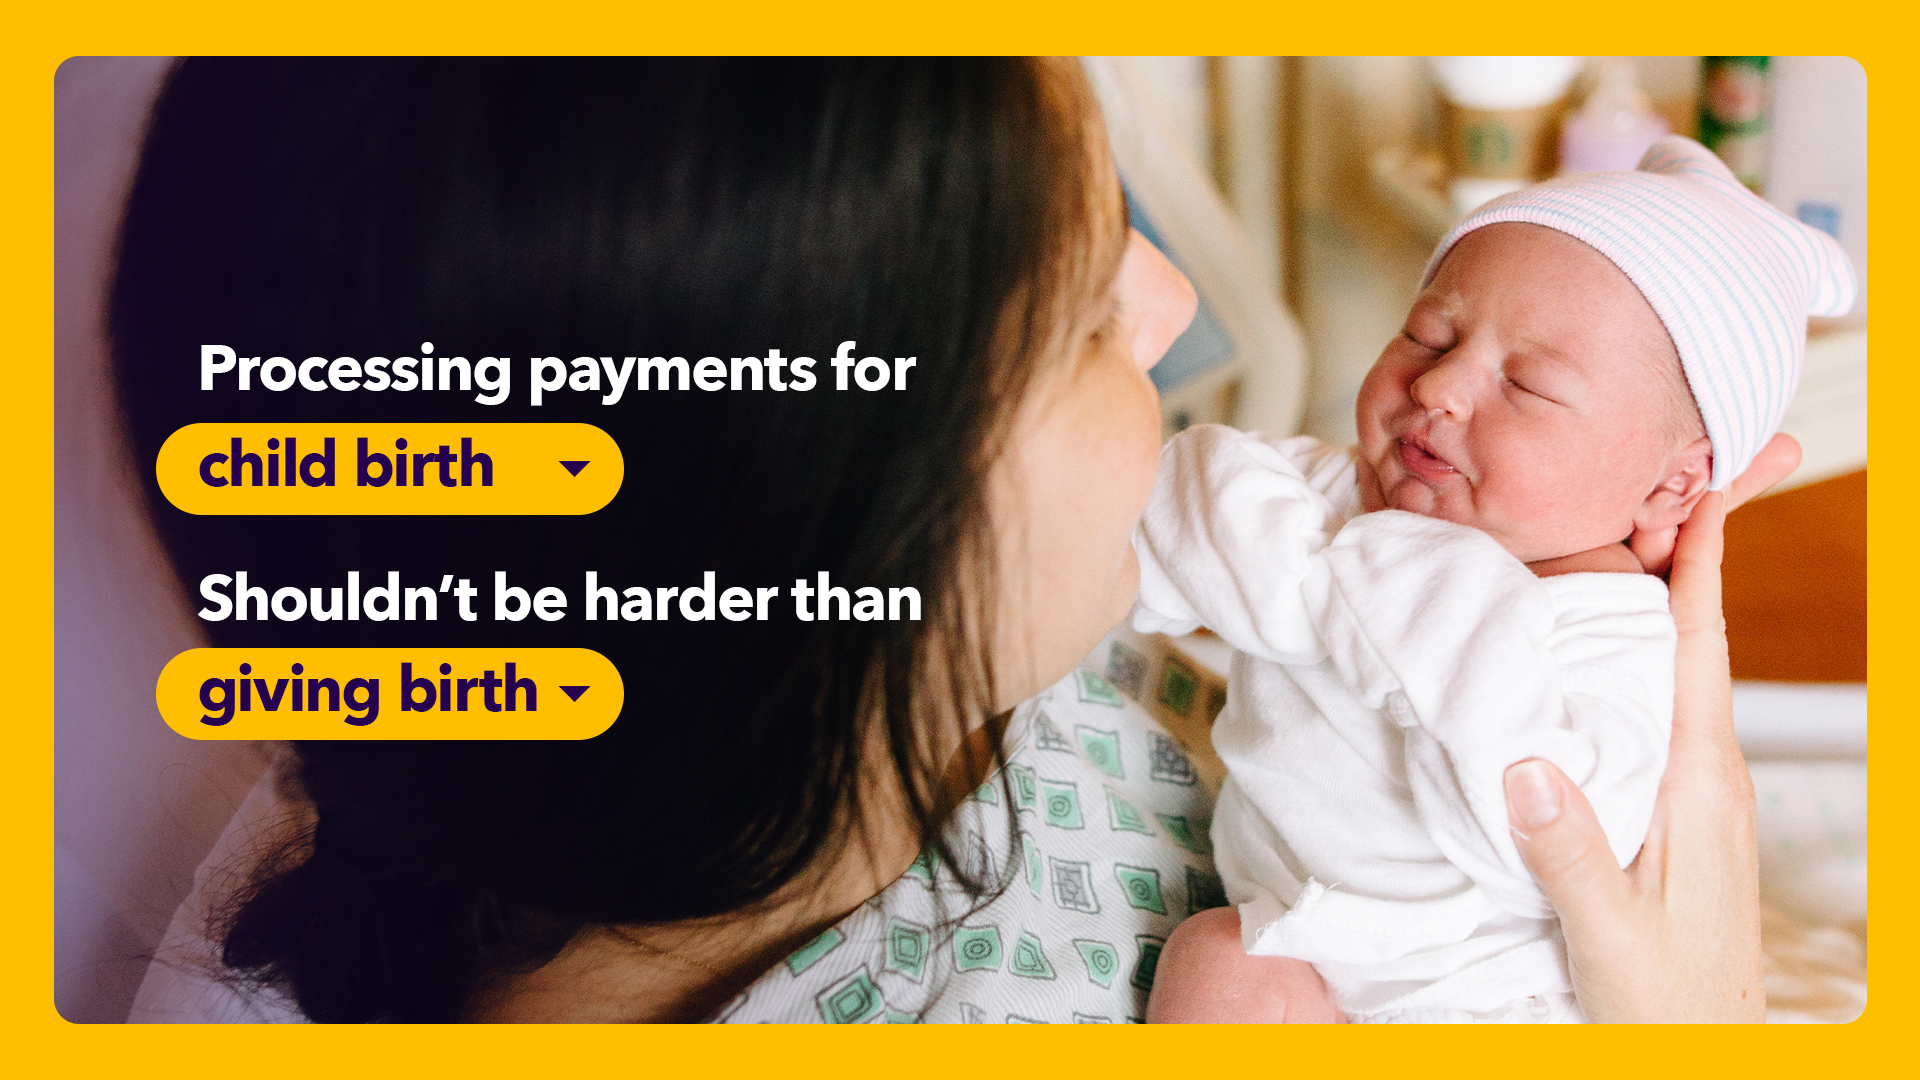 Processing payments for child birth shouldn't be harder than giving birth.